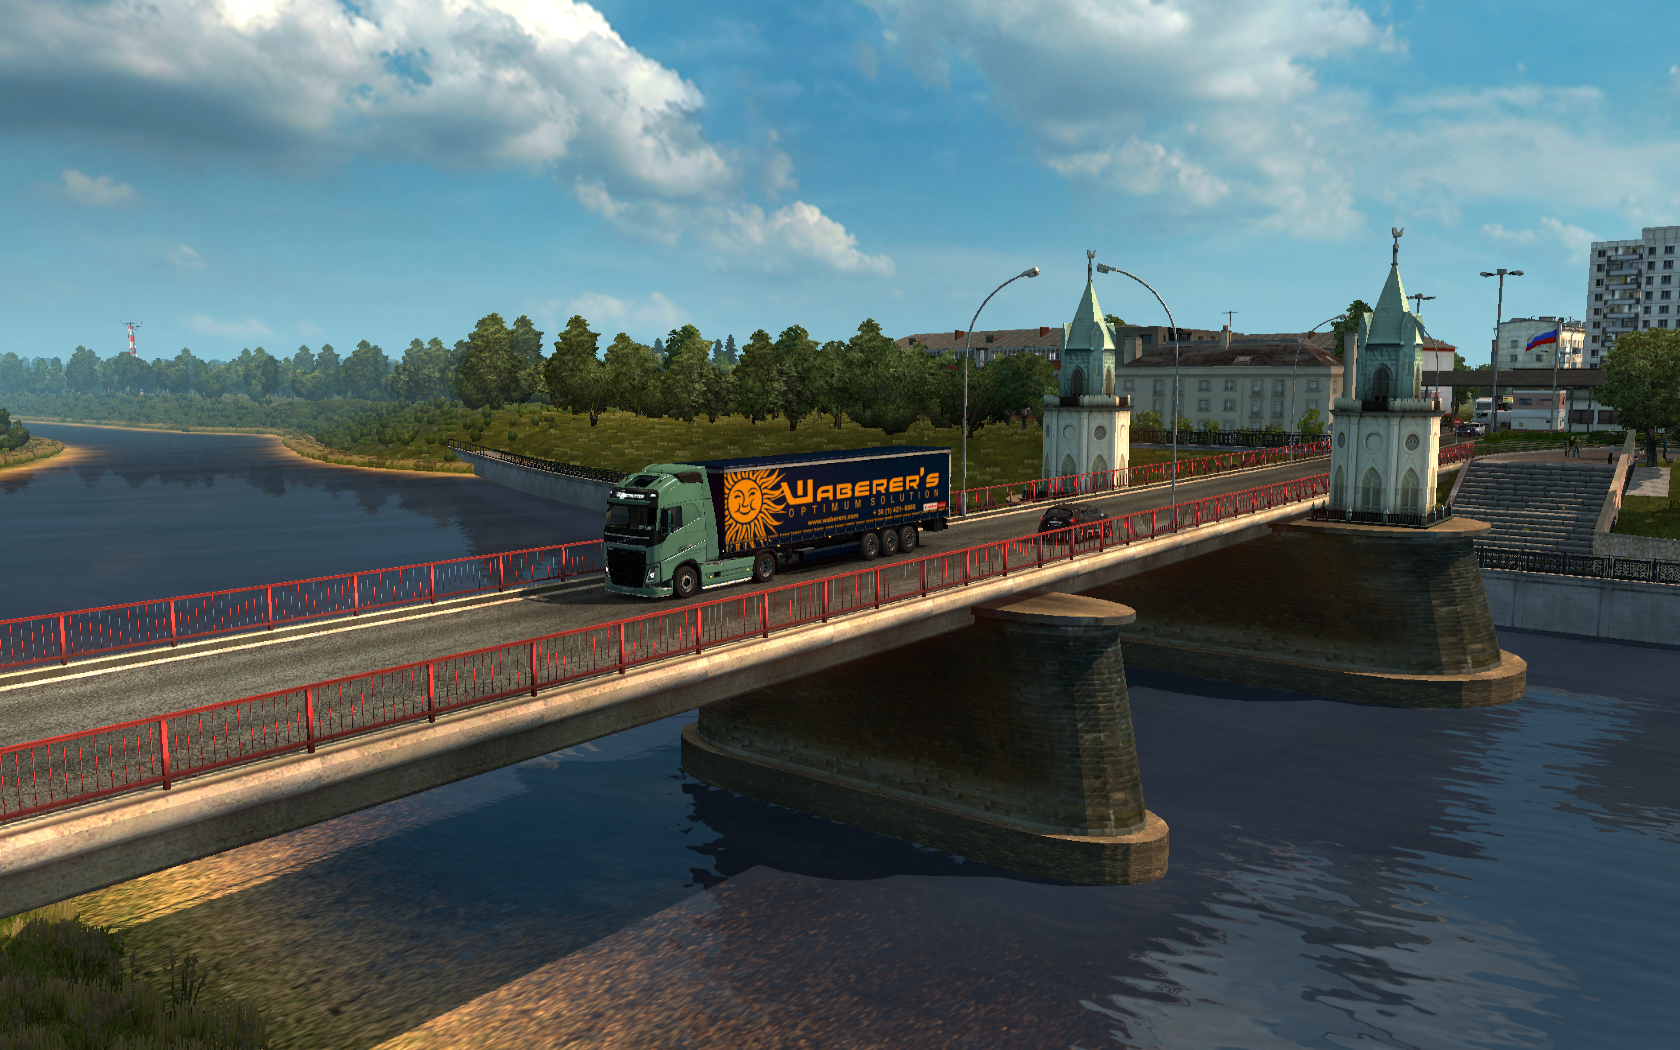 ets2_00076.png